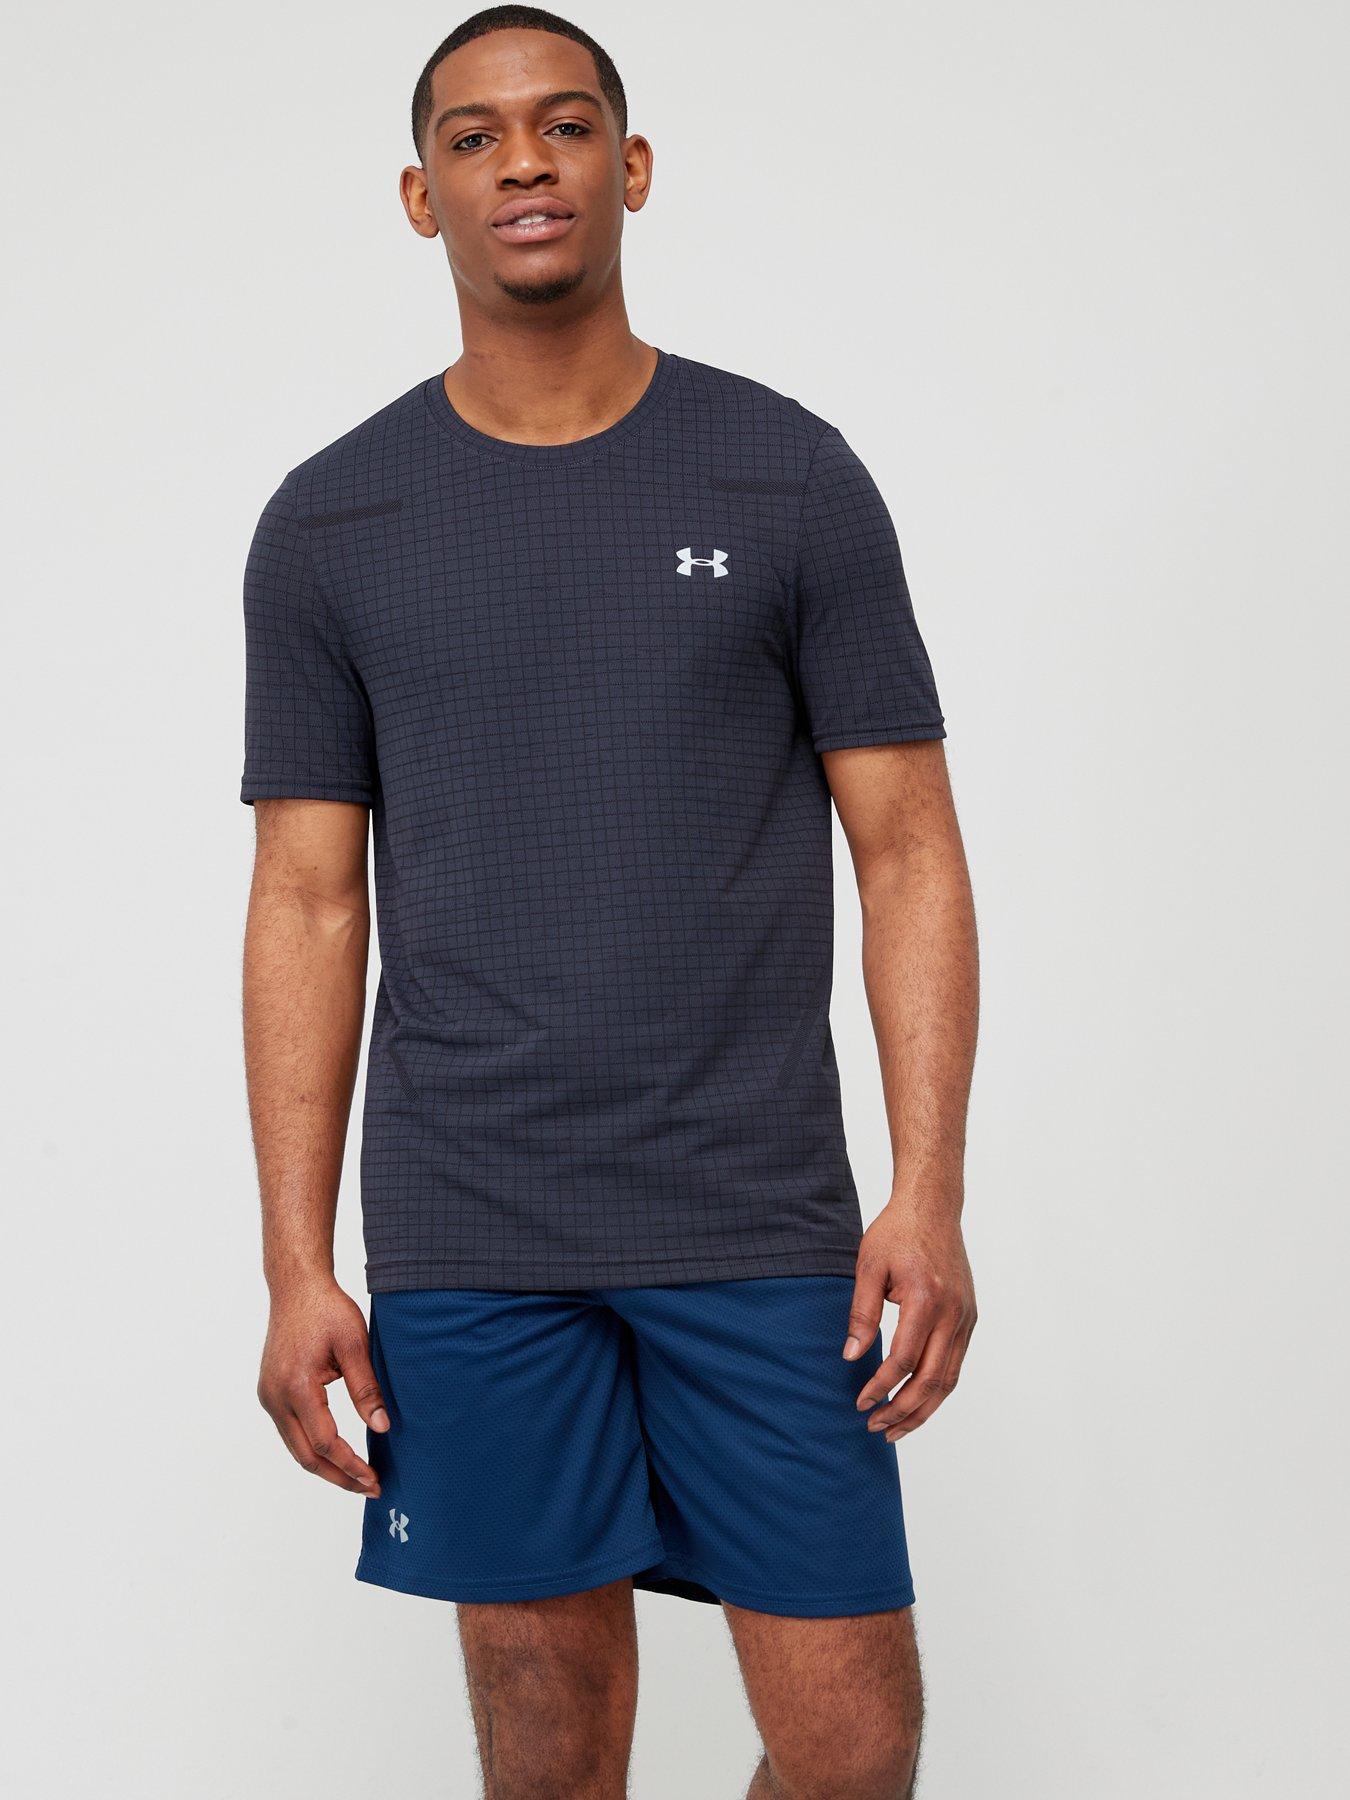 Under Armour seamless wave logo t-shirt in black